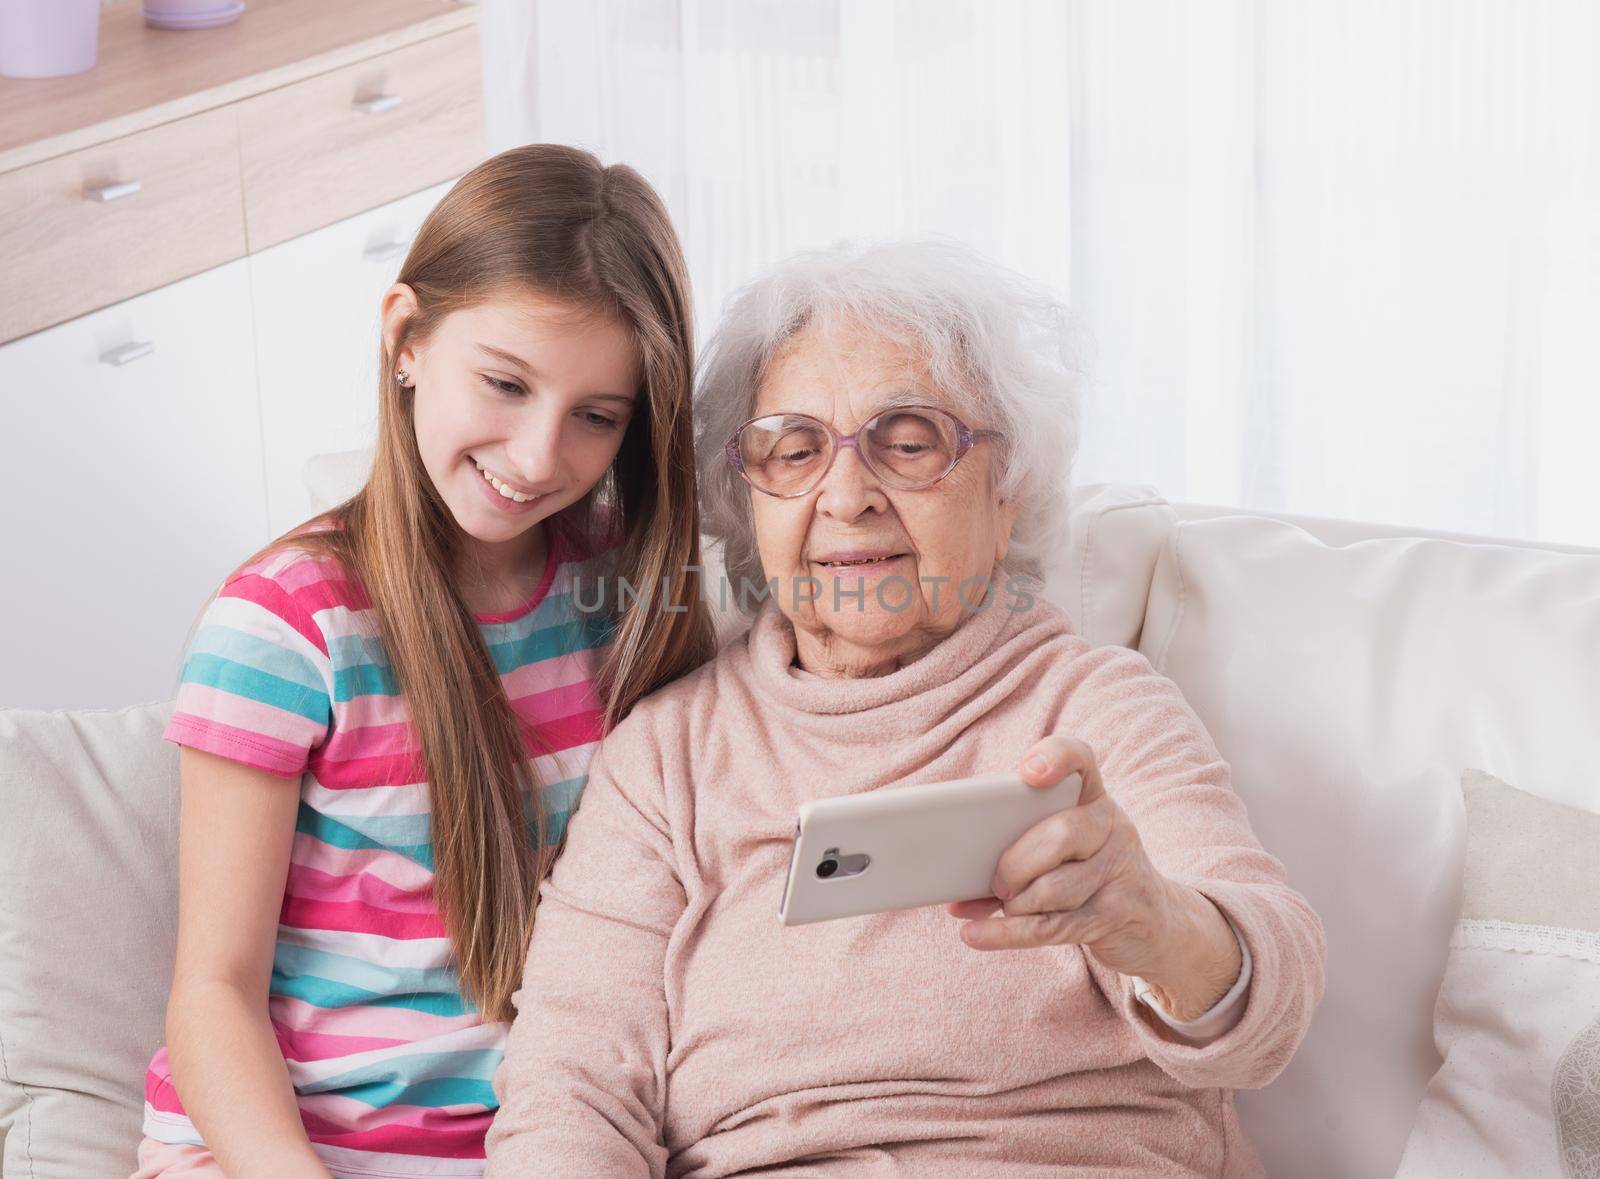 Little granddaughter taking selfie with great-grandmother